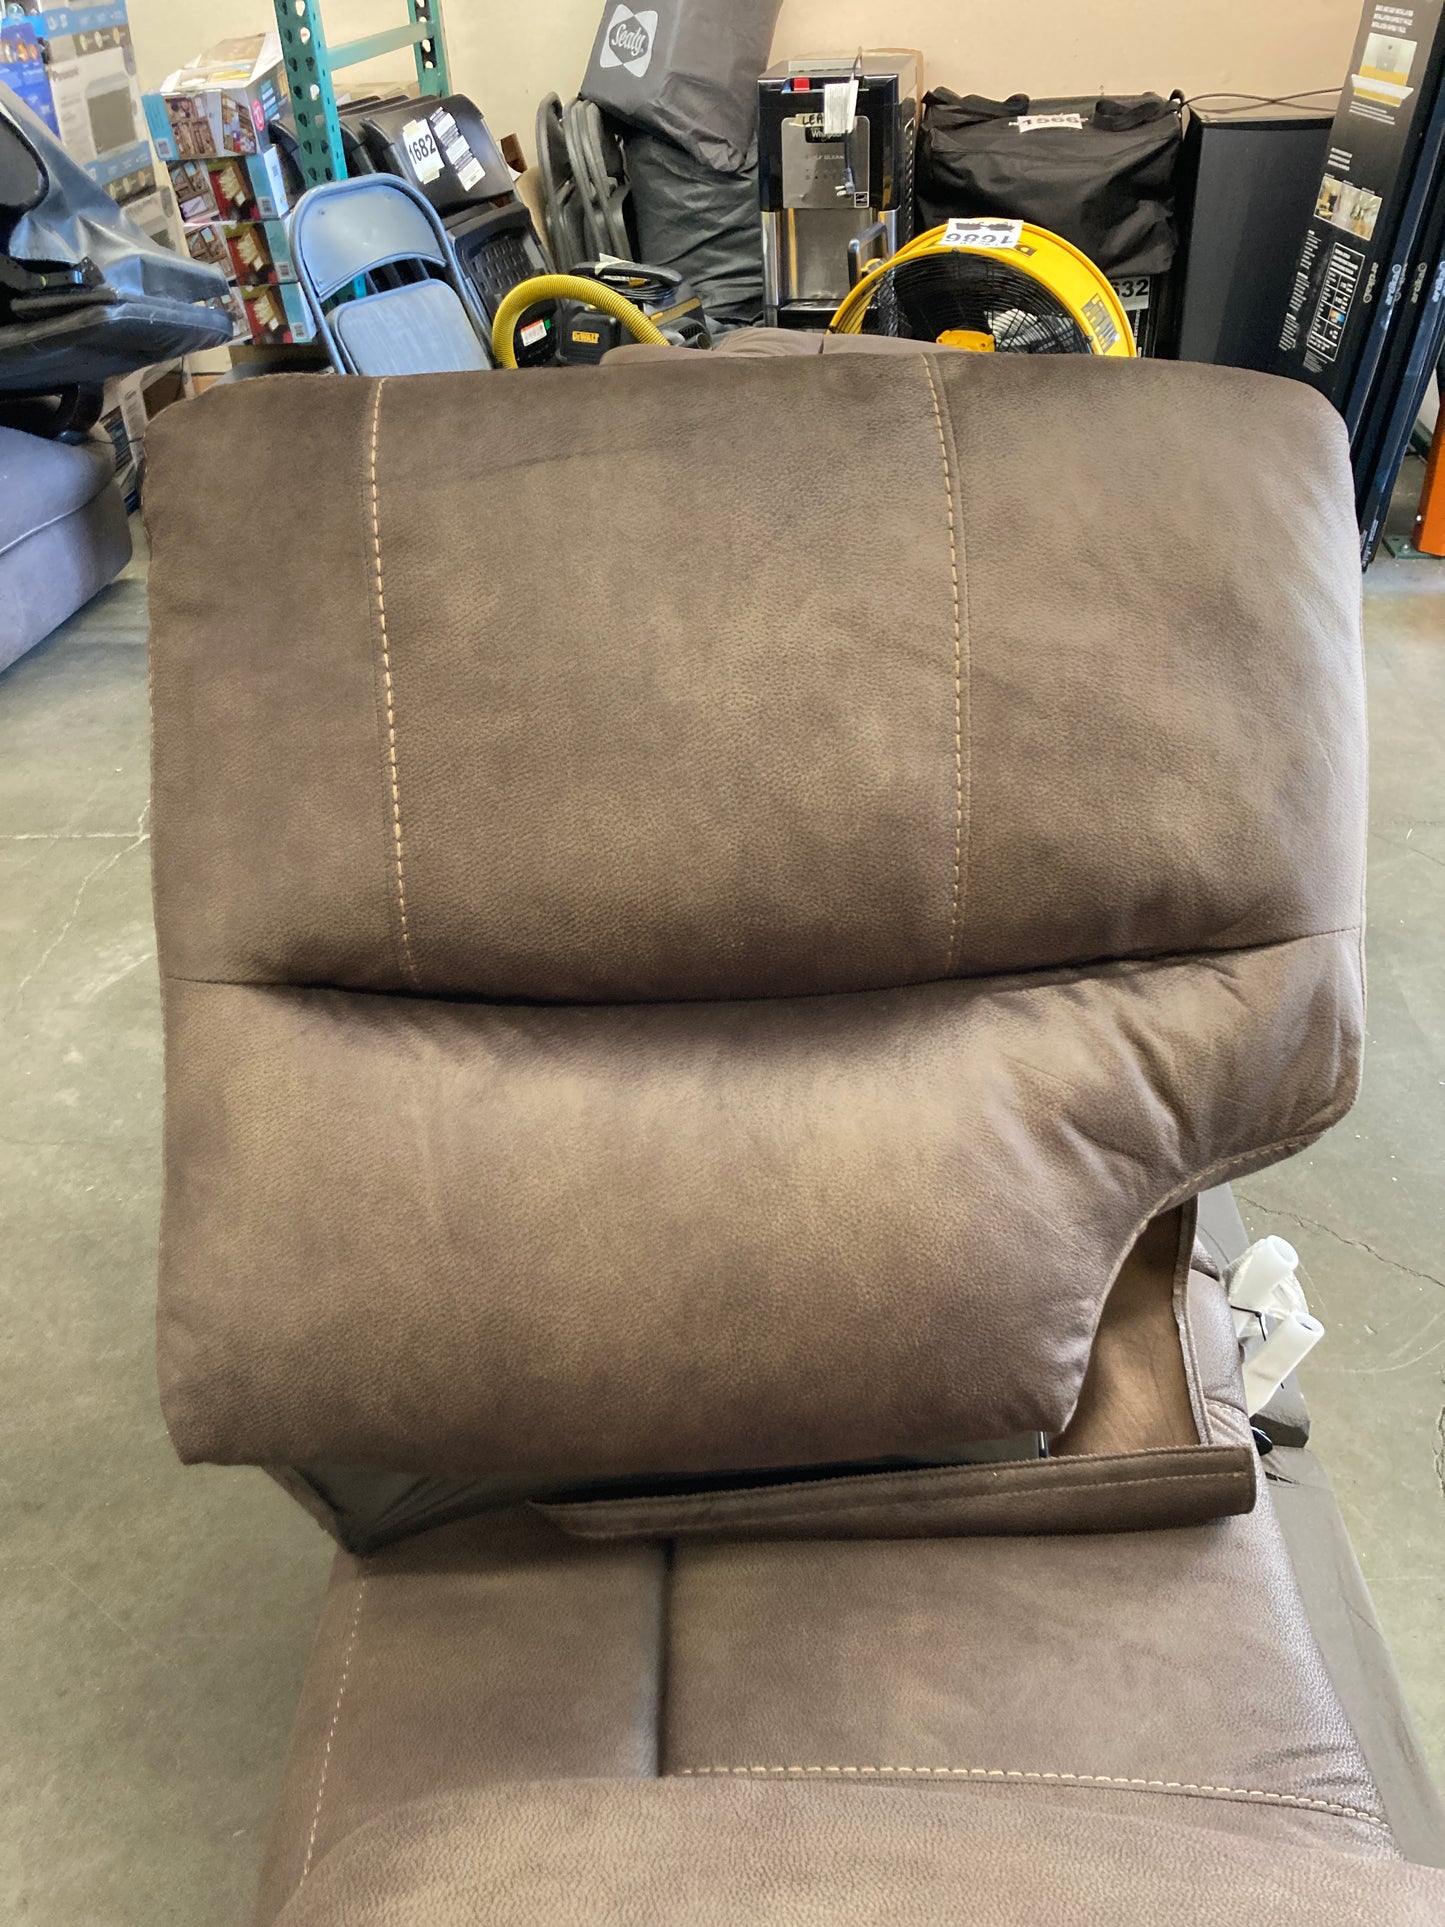 NEW - Costco - Barcalounger Henley Fabric Manual Reclining Sofa - Retail $1199 Default Title